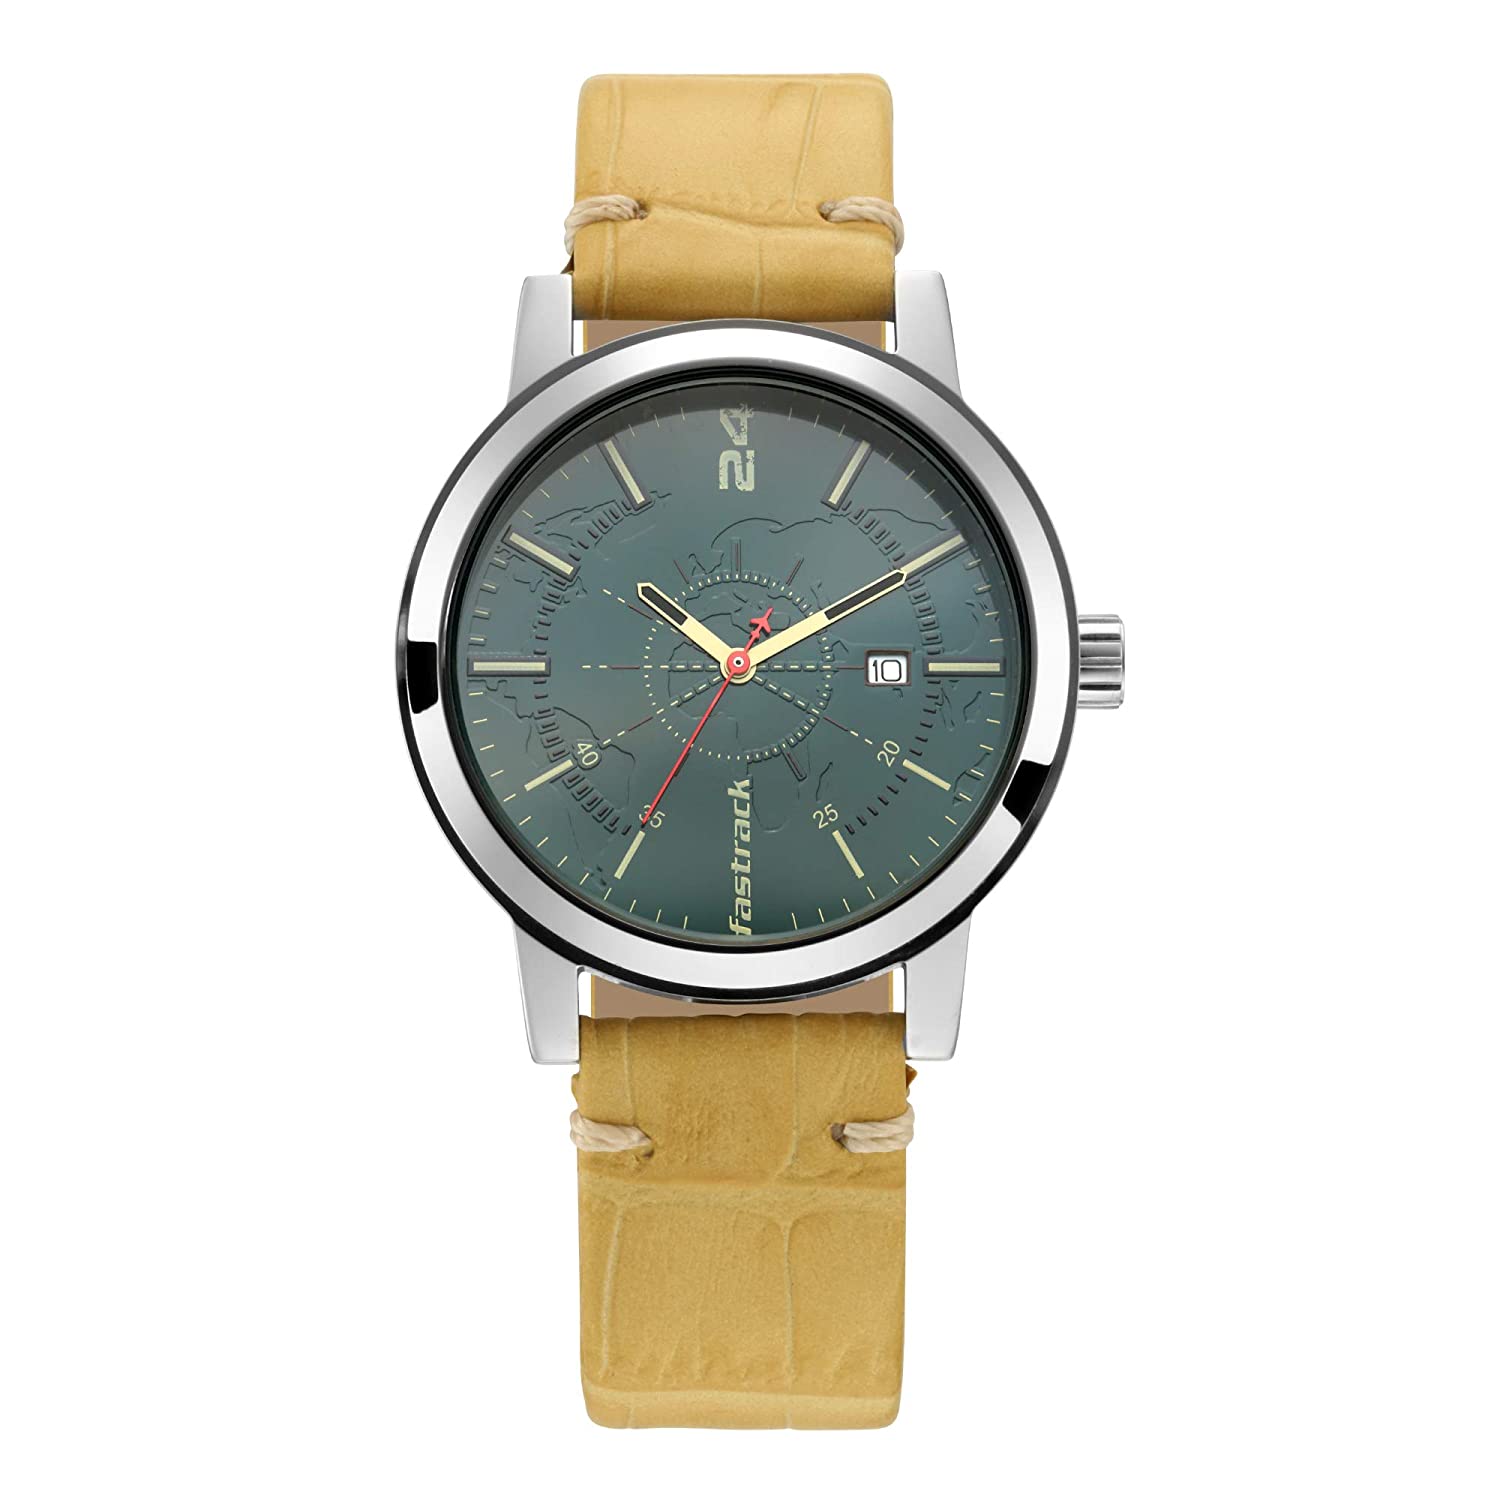 Fastrack Tripster Men Watch 3245SL01 | Leather Band | Water-Resistant | Quartz Movement | Classic Style | Fashionable | Durable | Affordable | Halabh.com